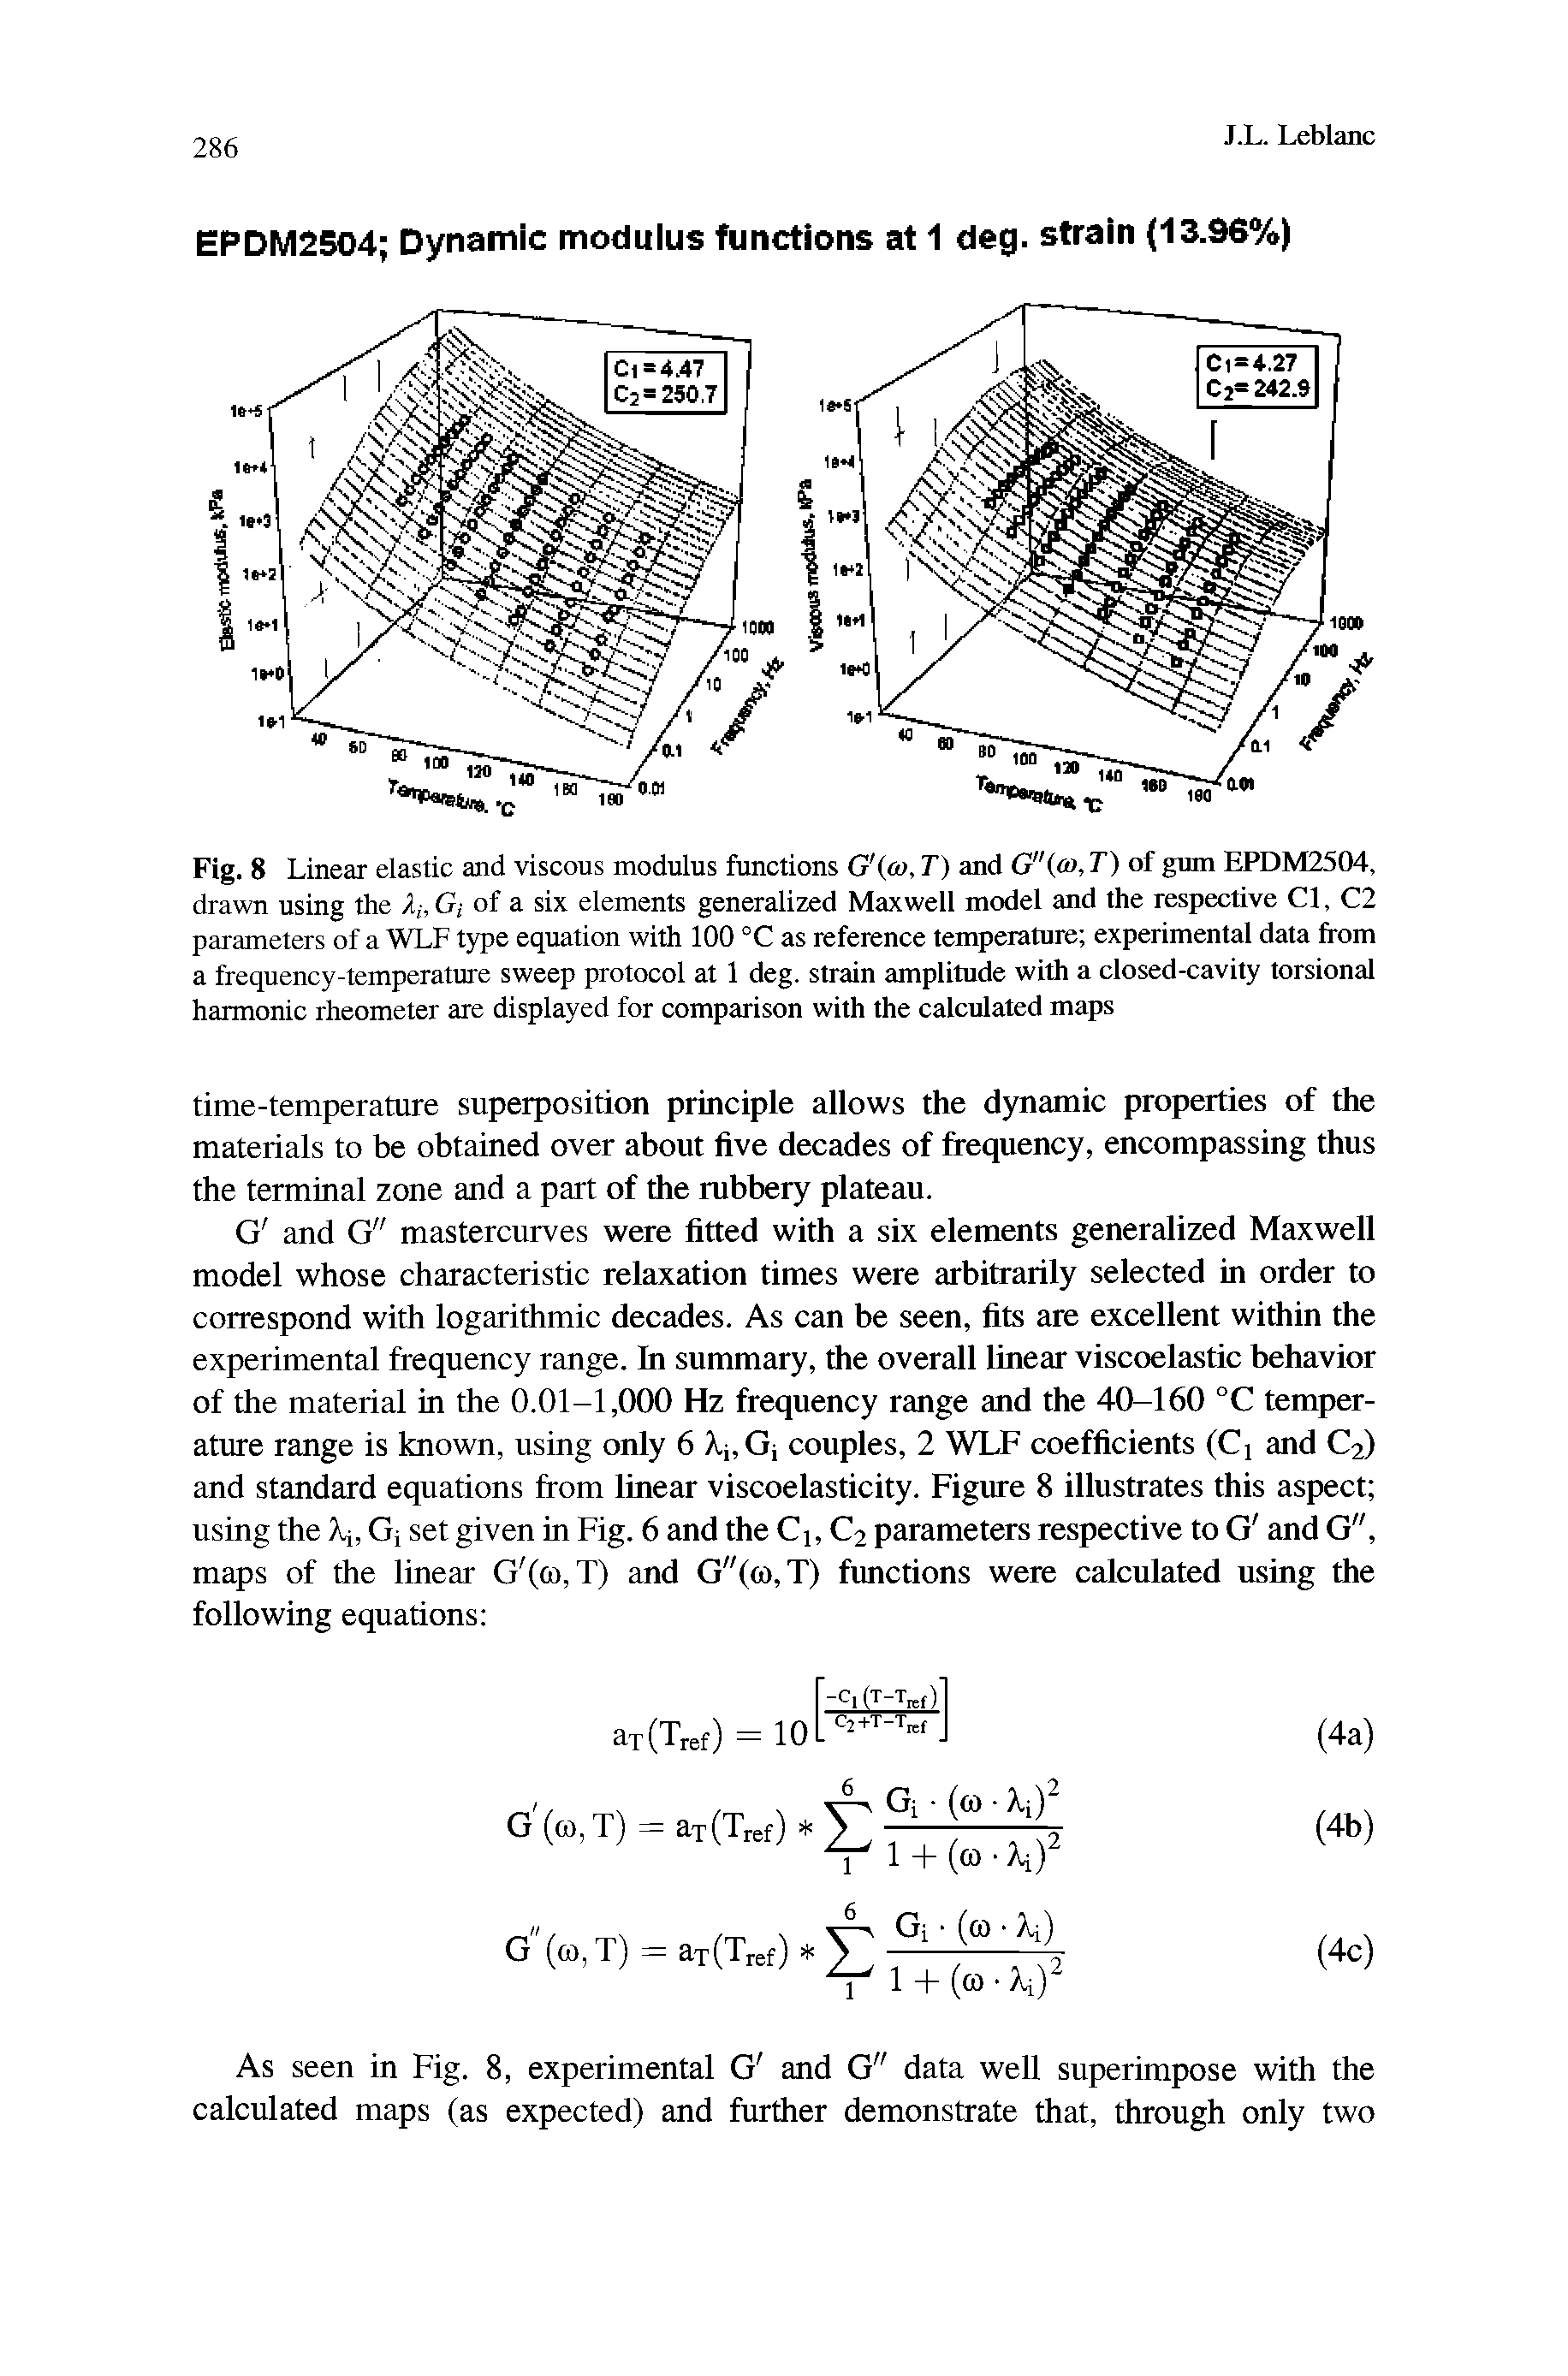 Fig. 8 Linear elastic and viscous modulus functions G co, T) and G"(a>, T) of gum EPDM2504, drawn using the G of a six elements generalized Maxwell model and the respective Cl, C2 parameters of a WLF type equation with 100 °C as reference temperature experimeutal data from a frequency-temperature sweep protocol at 1 deg. strain amplitude with a closed-cavity torsional harmonic rheometer are displayed for comparison with the calculated maps...